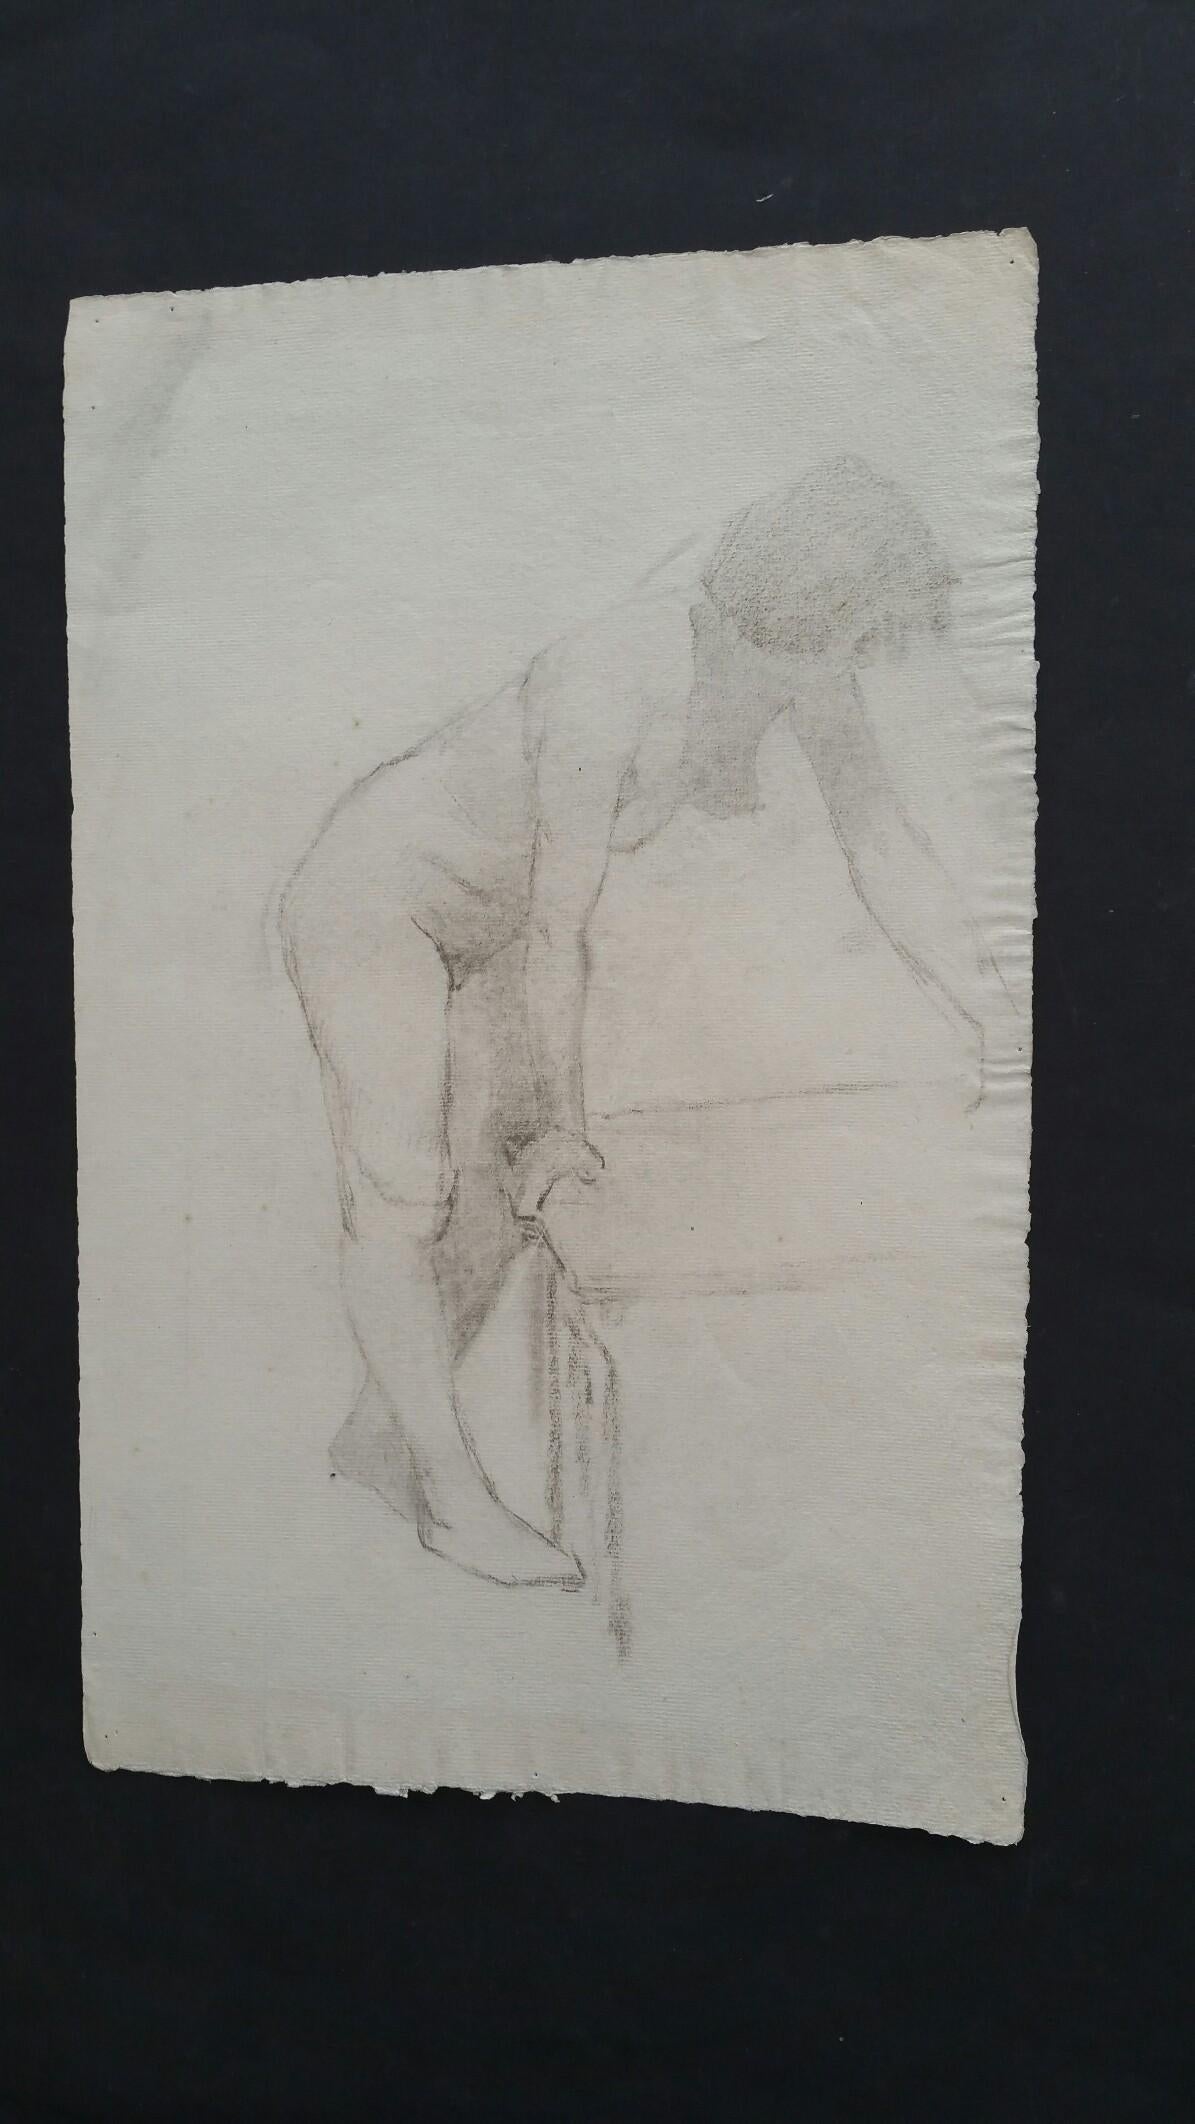 English graphite sketch of a female nude, leaning.
by Henry George Moon (British 1857-1905).
on off white artists paper, unframed.
measurements: sheet 18.25 x 11.5 inches.

Provenance: from the artists estate

Condition report: pin holes to